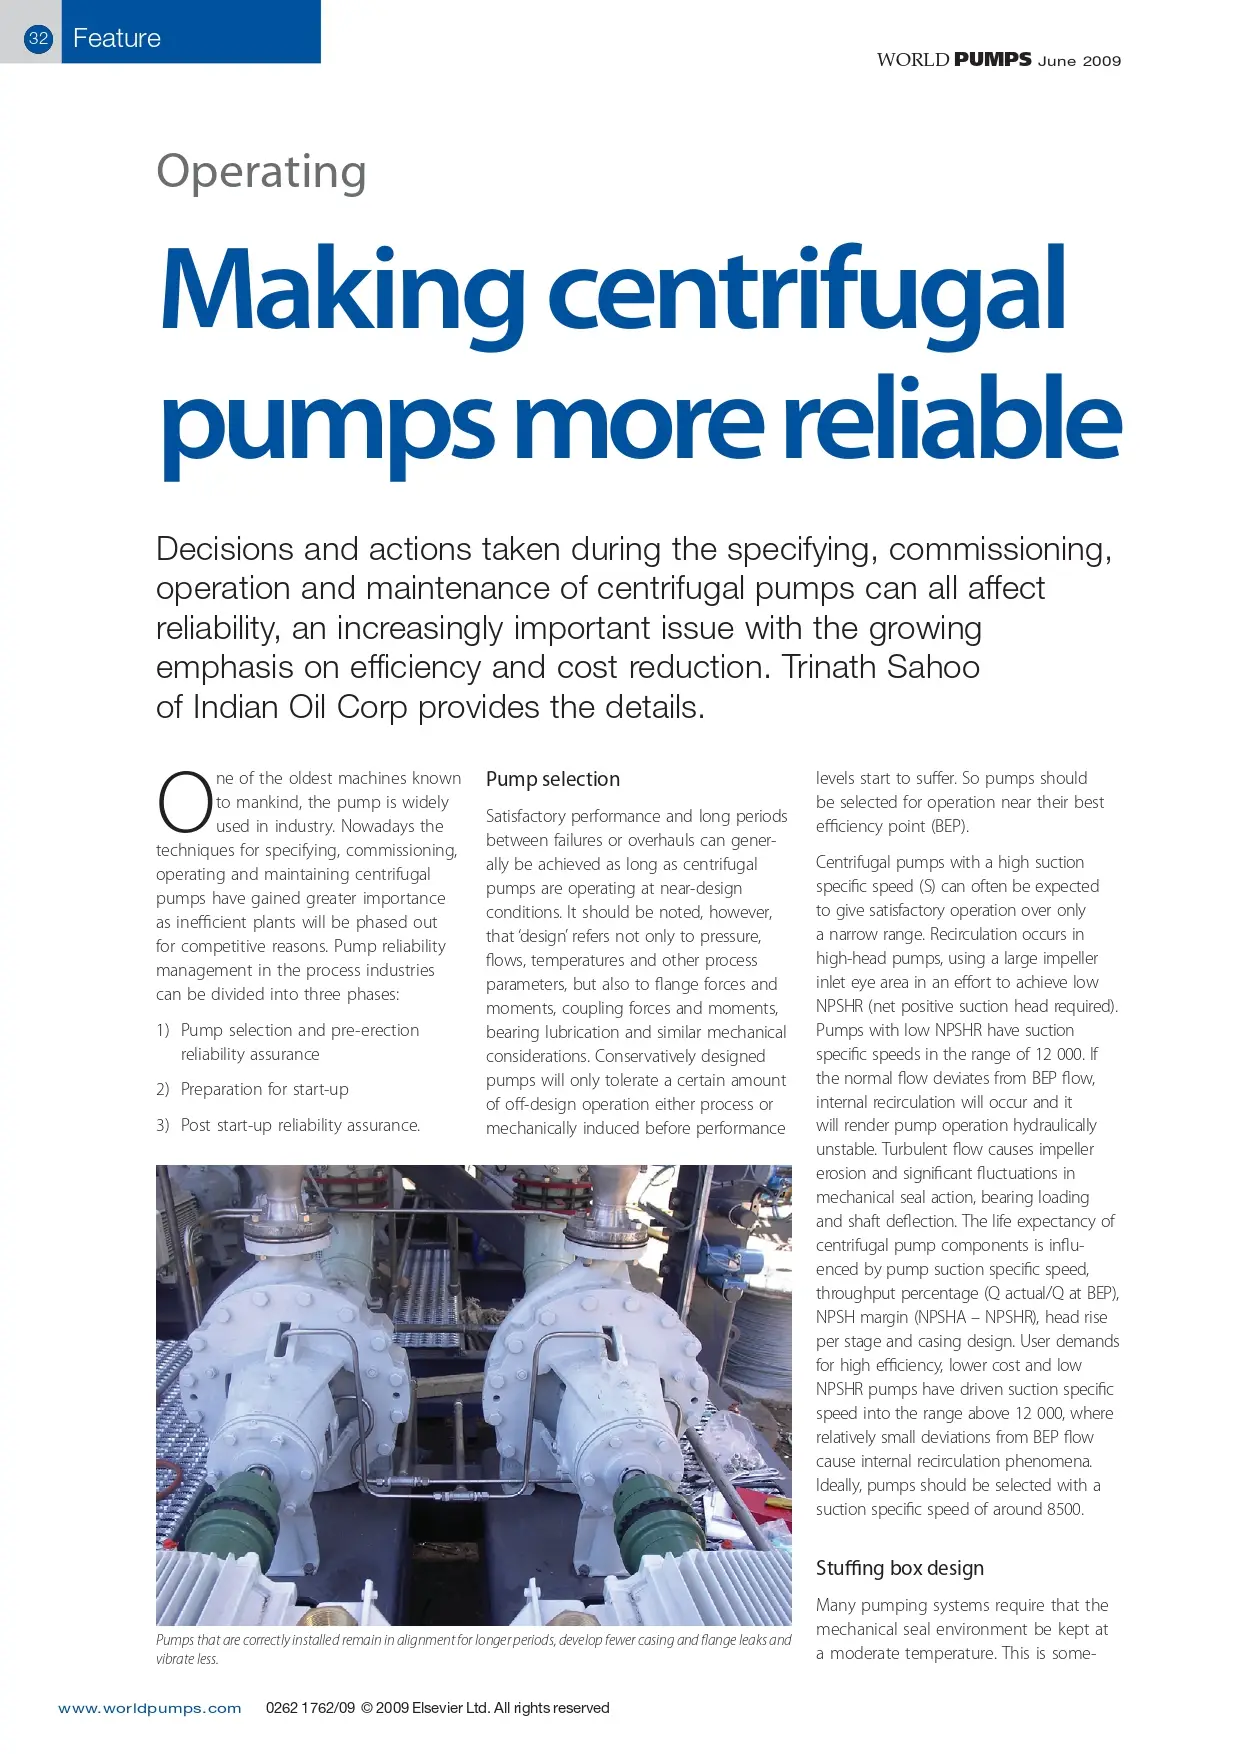 Making Centrifugal Pumps More Reliable